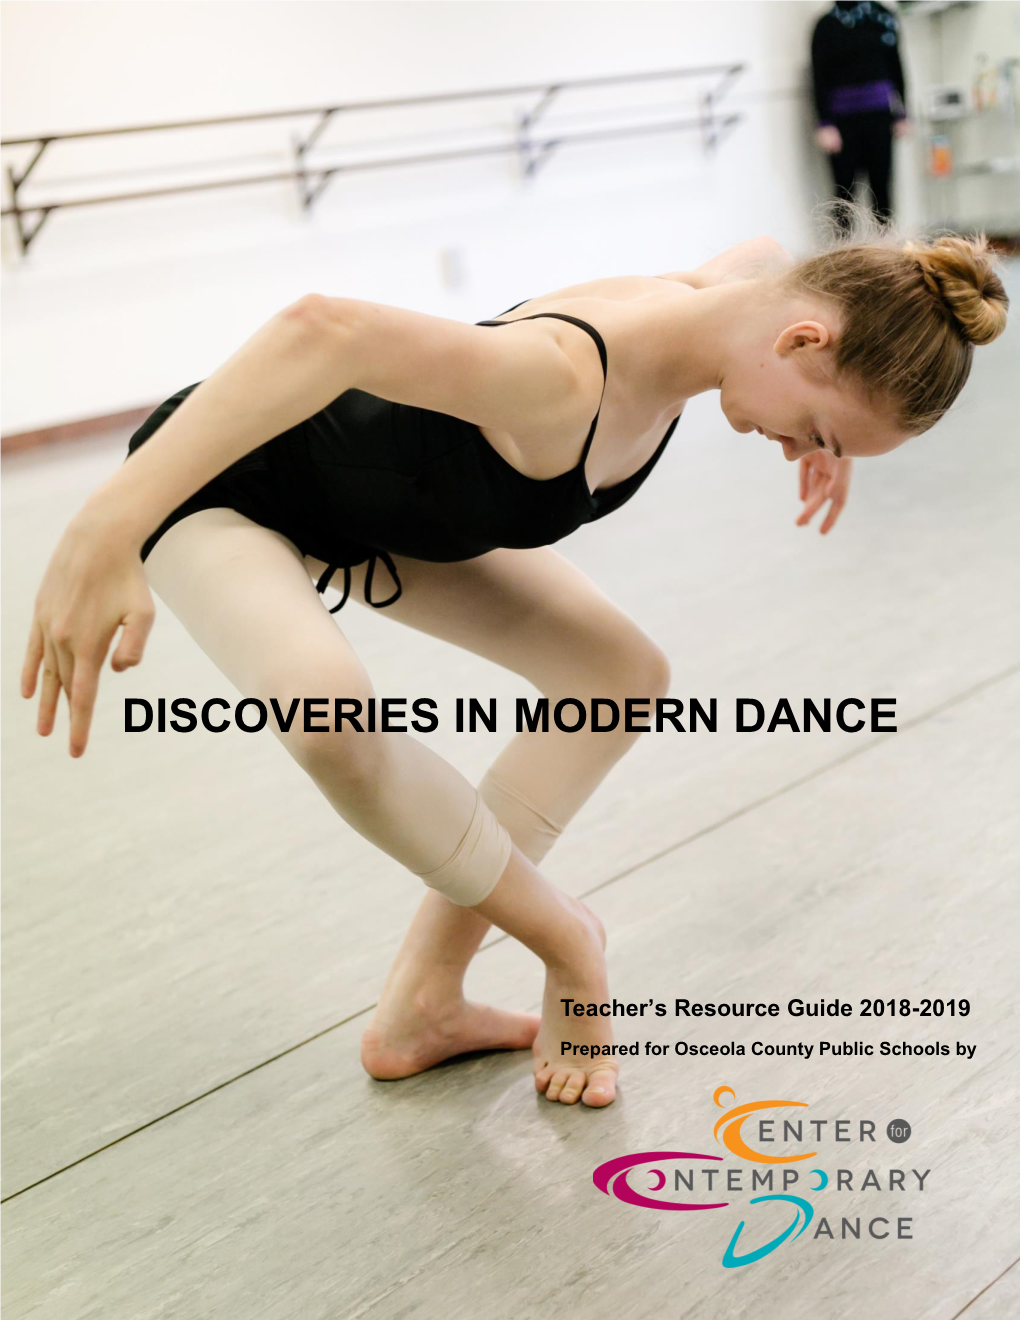 Discoveries in Modern Dance